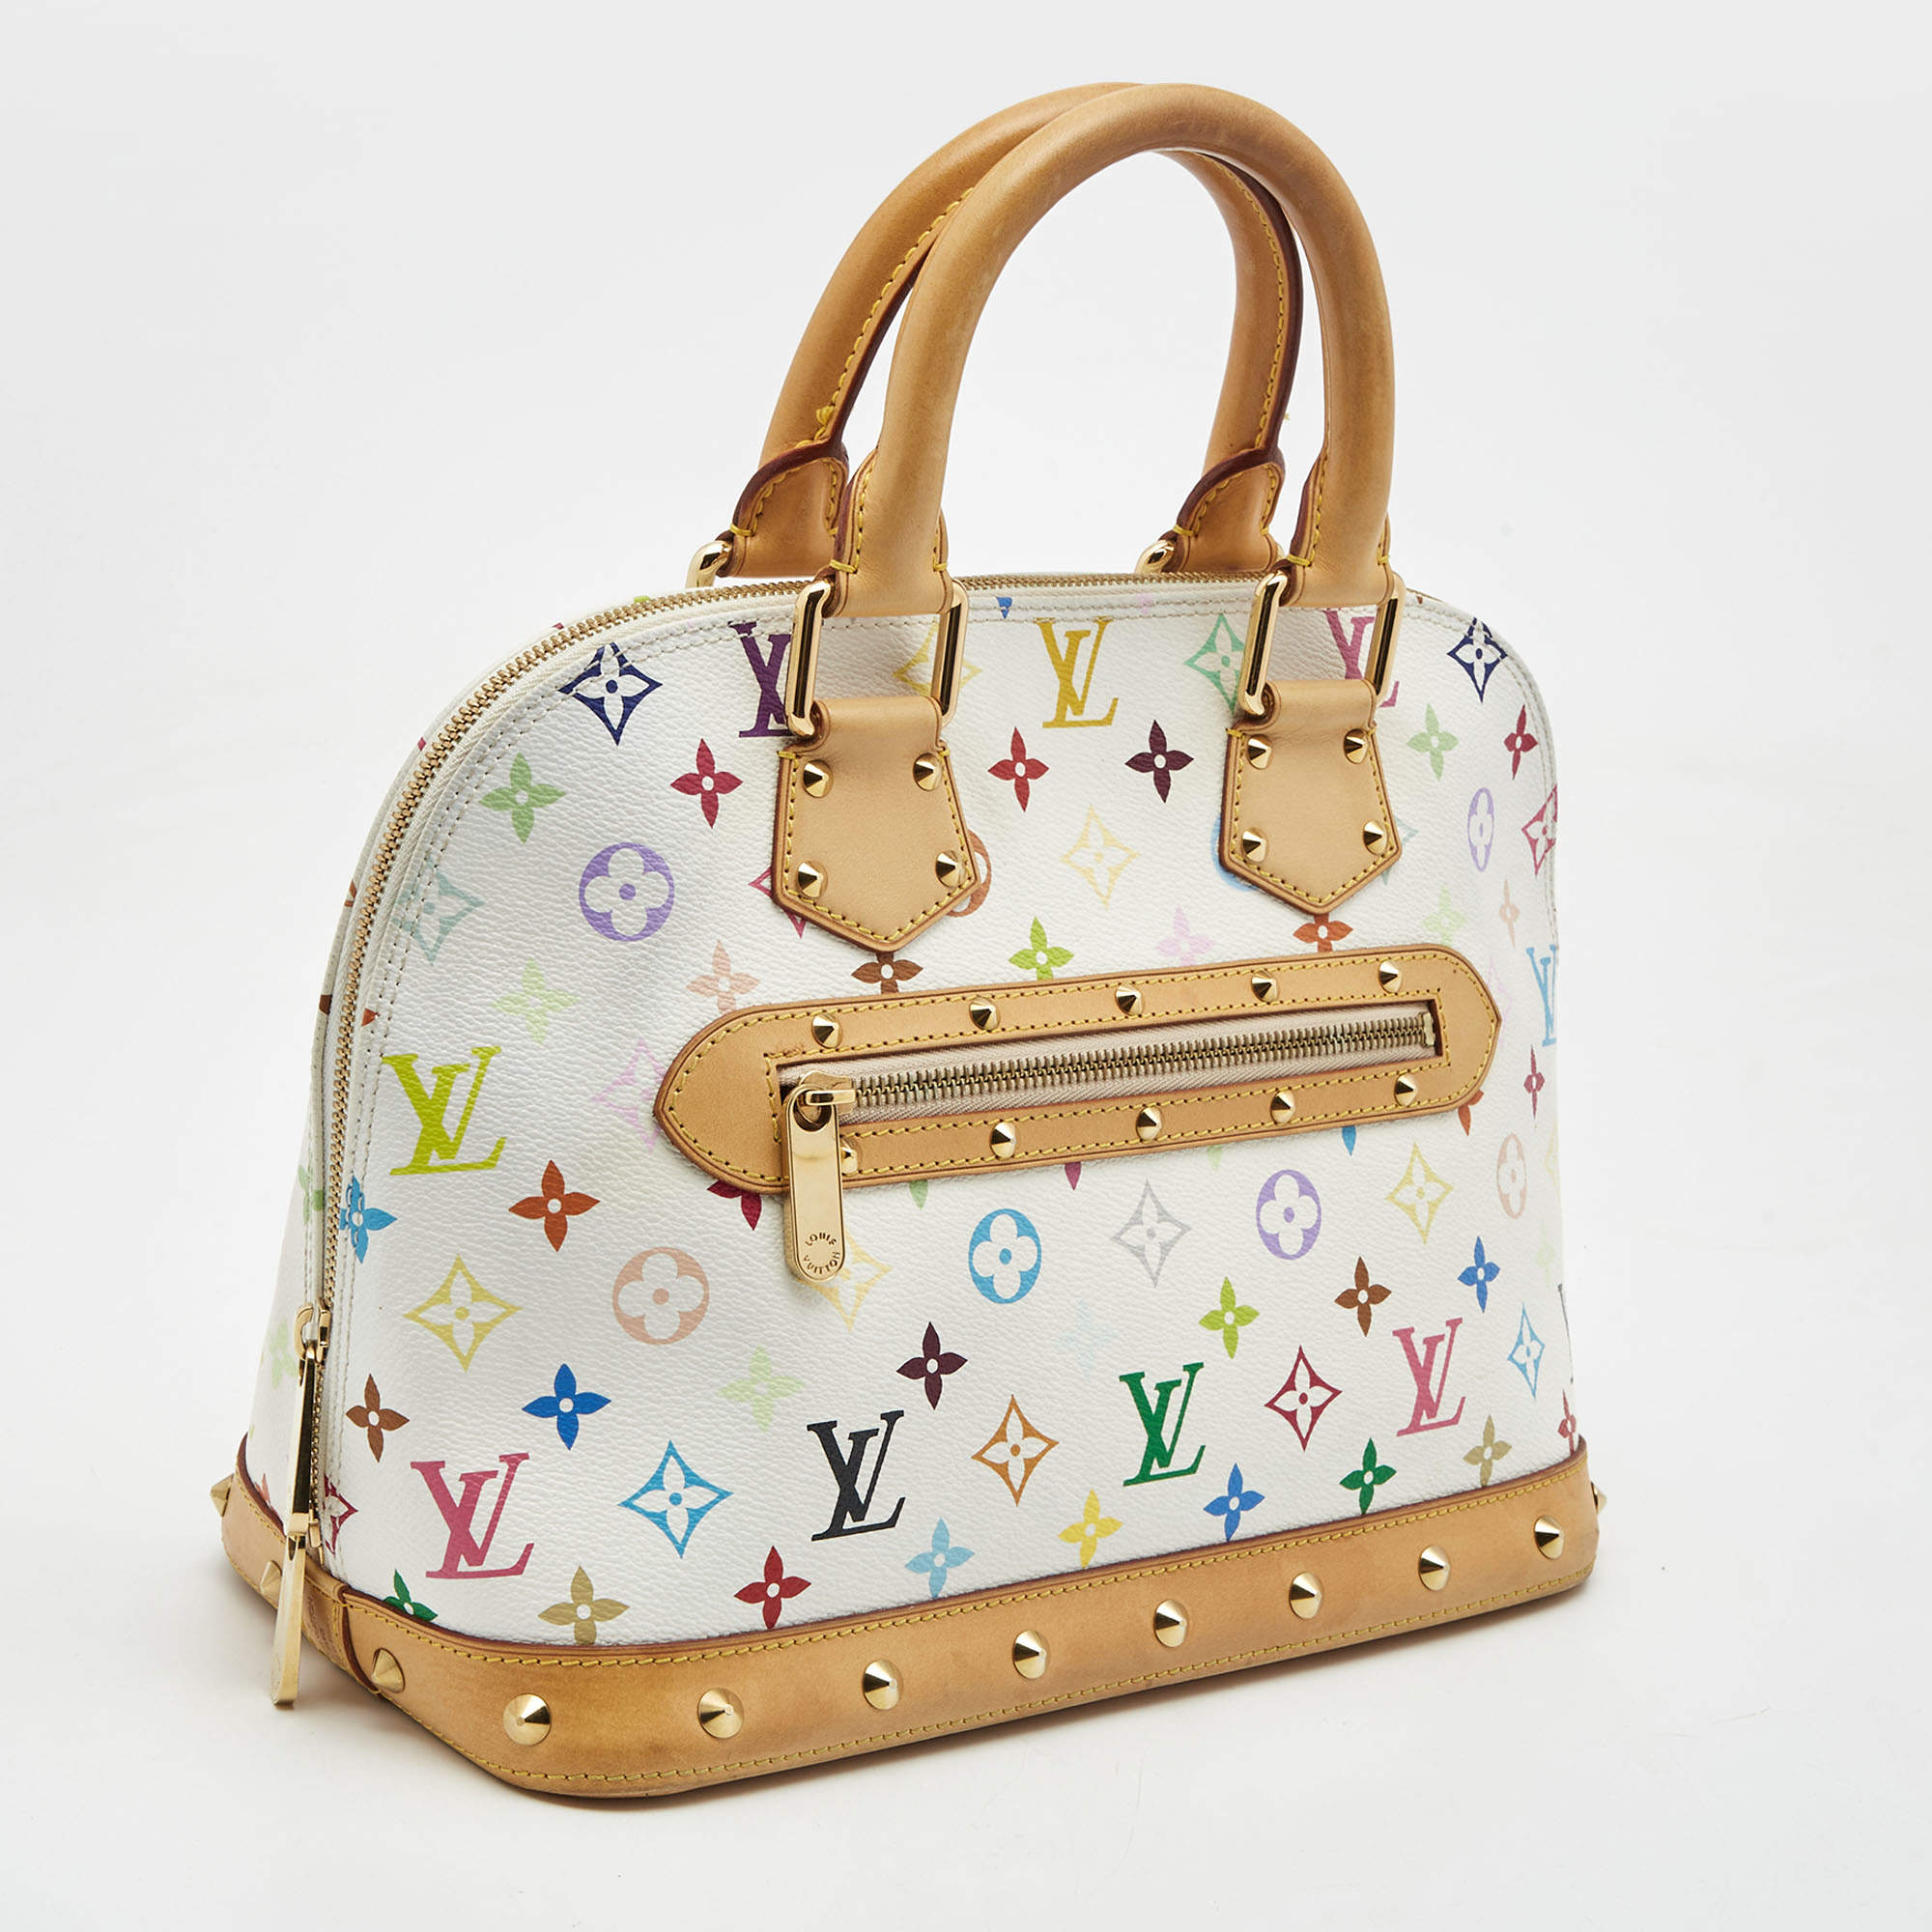 Louis Vuitton Monogram Multicolor Alma PM Blanc This Louis Vuitton Alma PM  in Monogram Multicolor canvas is made for anyone with impeccable taste., By BANANANINA